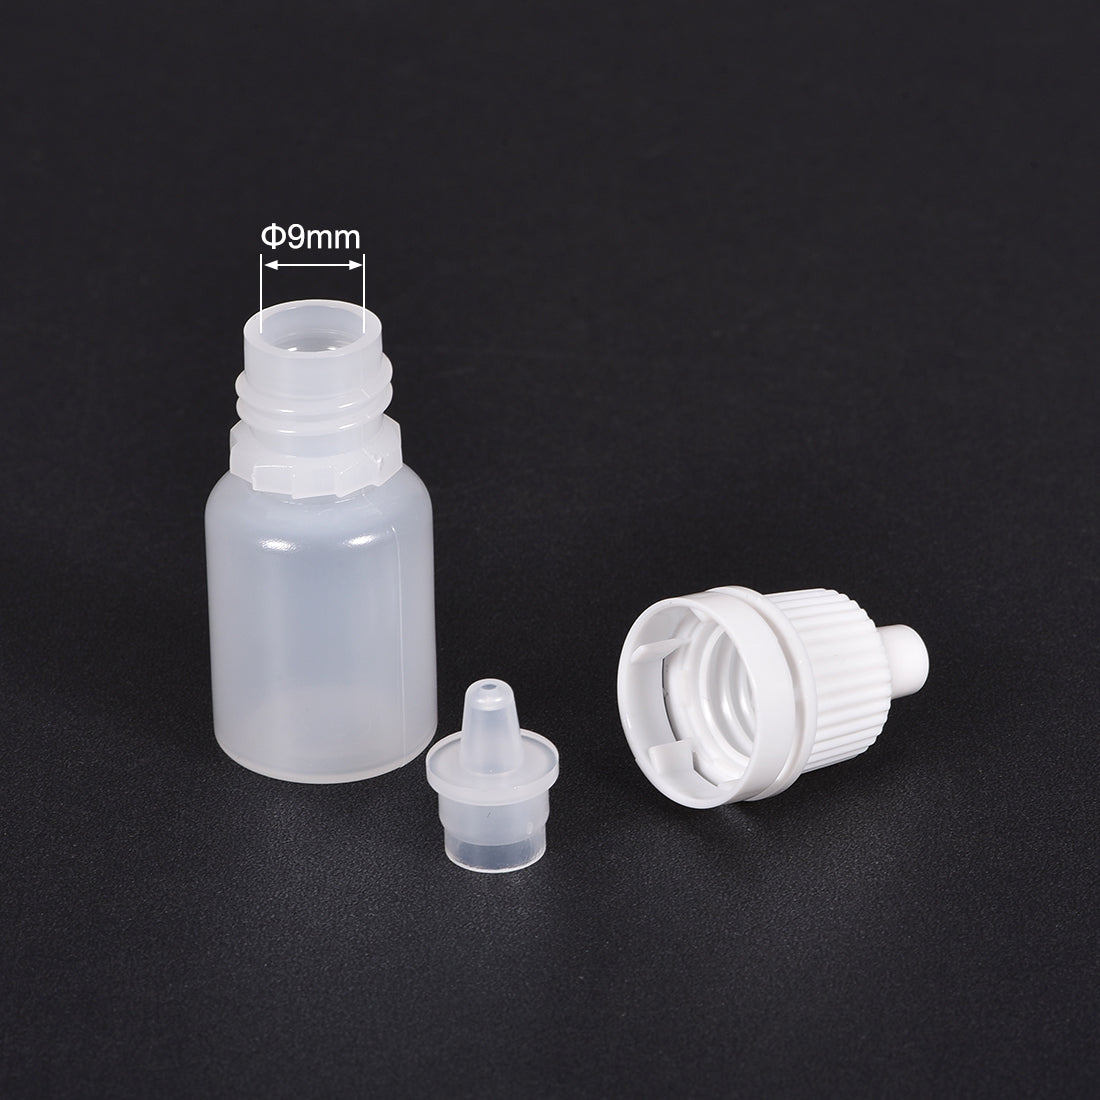 uxcell Uxcell 5ml/0.17 oz Empty Squeezable Dropper Bottle White 20pcs